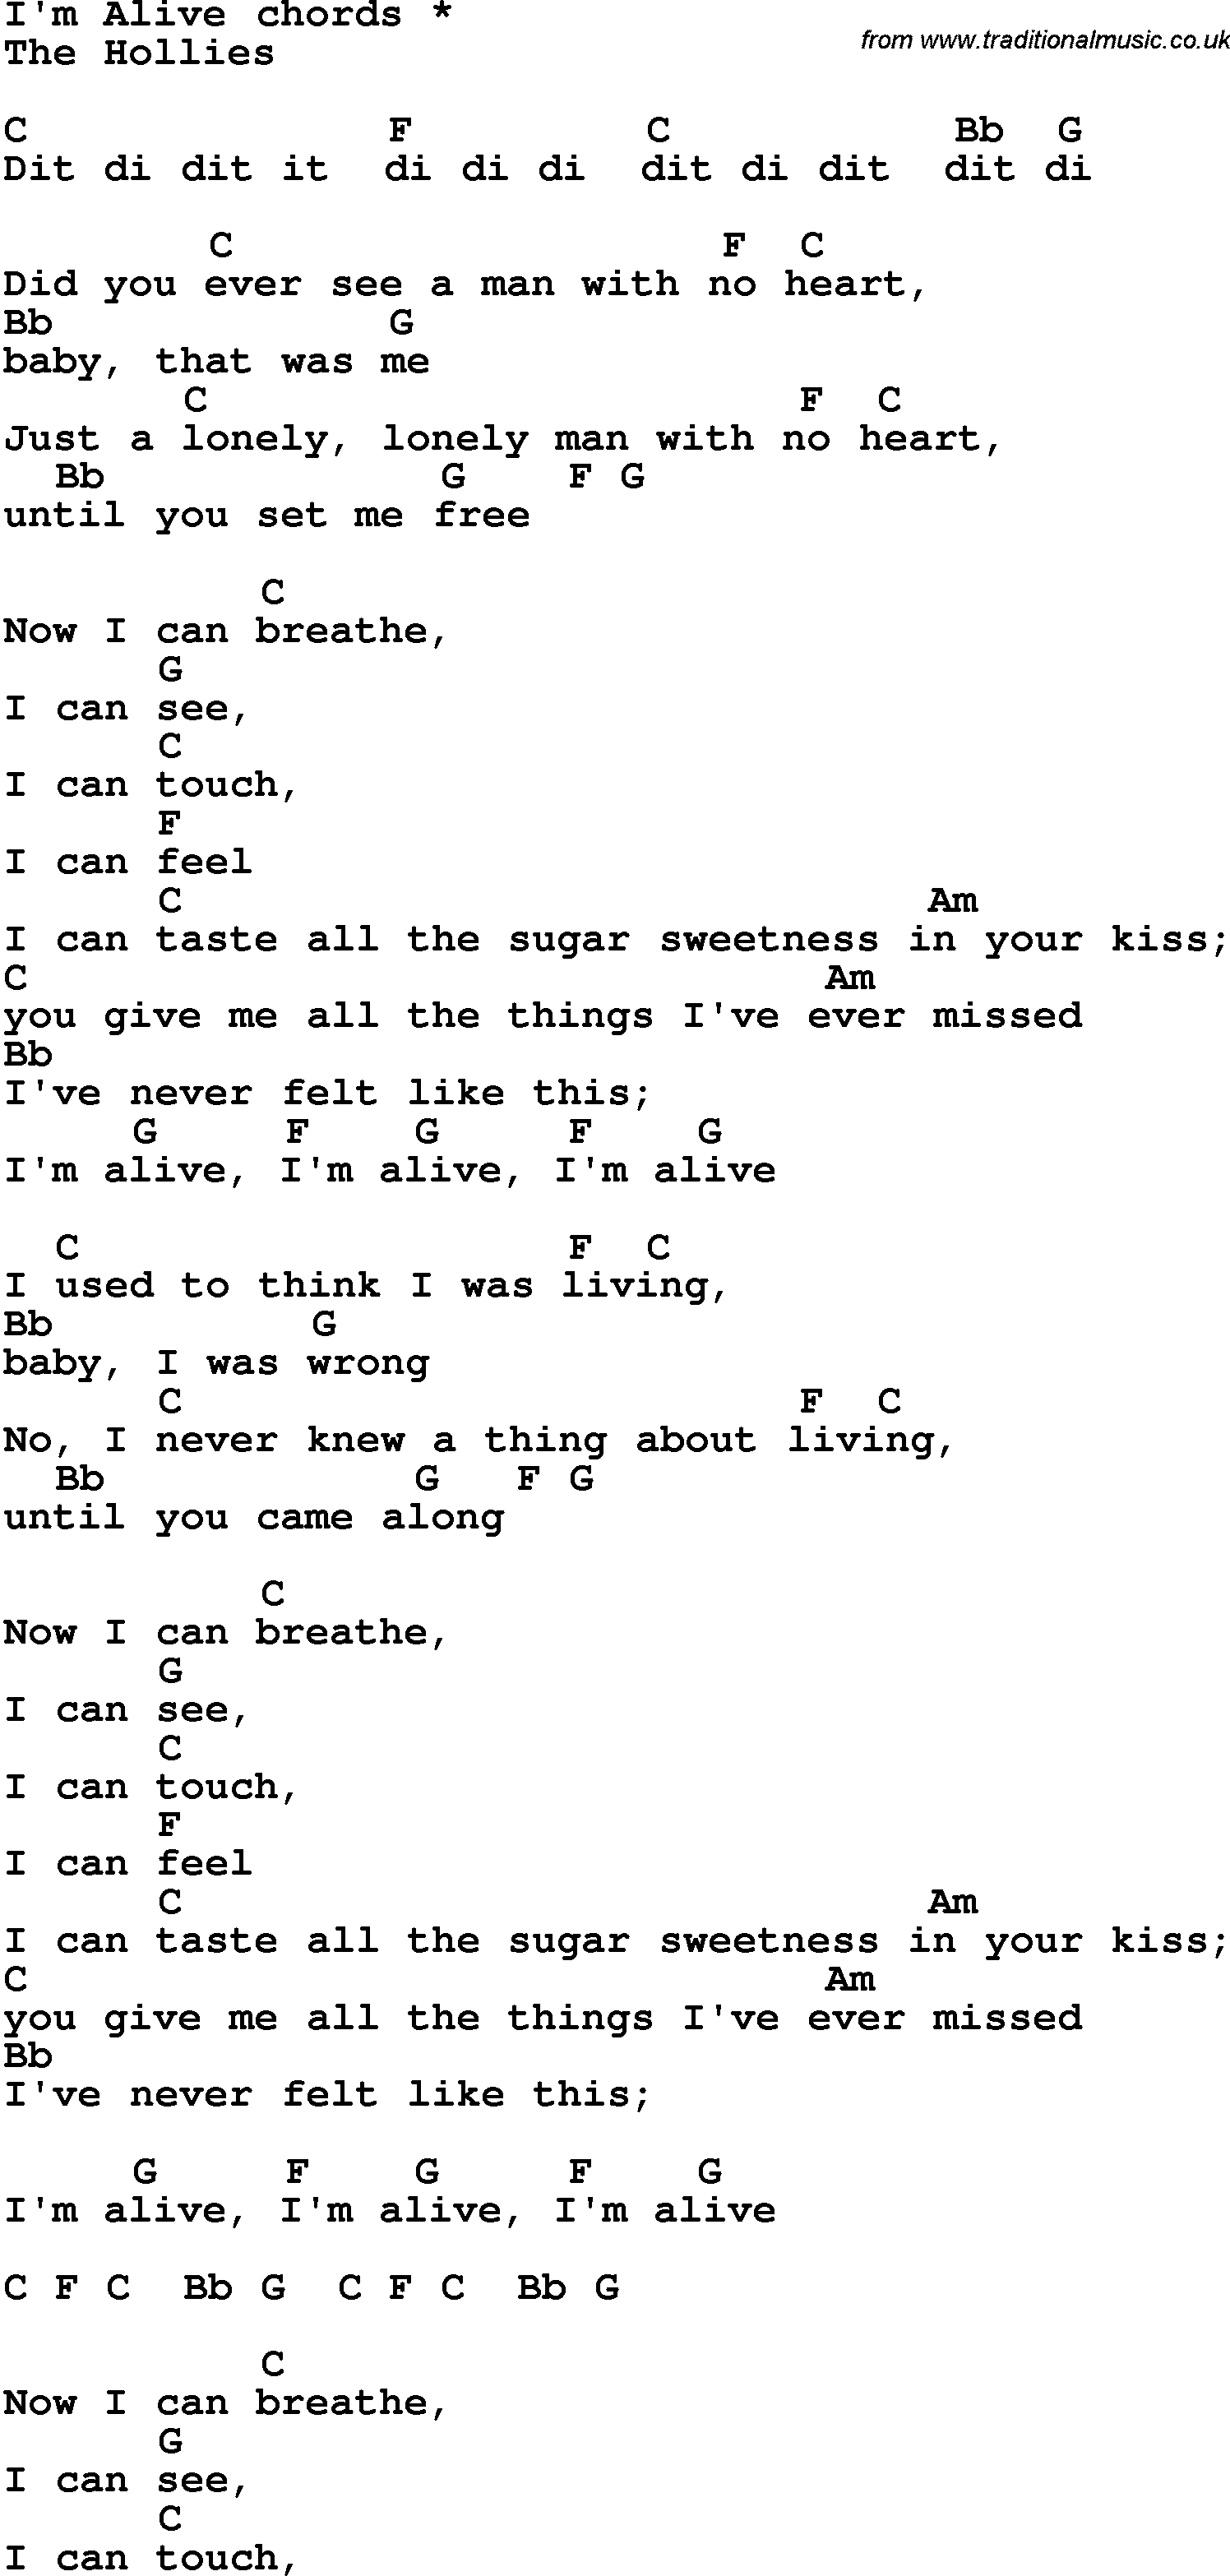 Song Lyrics with guitar chords for I'm Alive